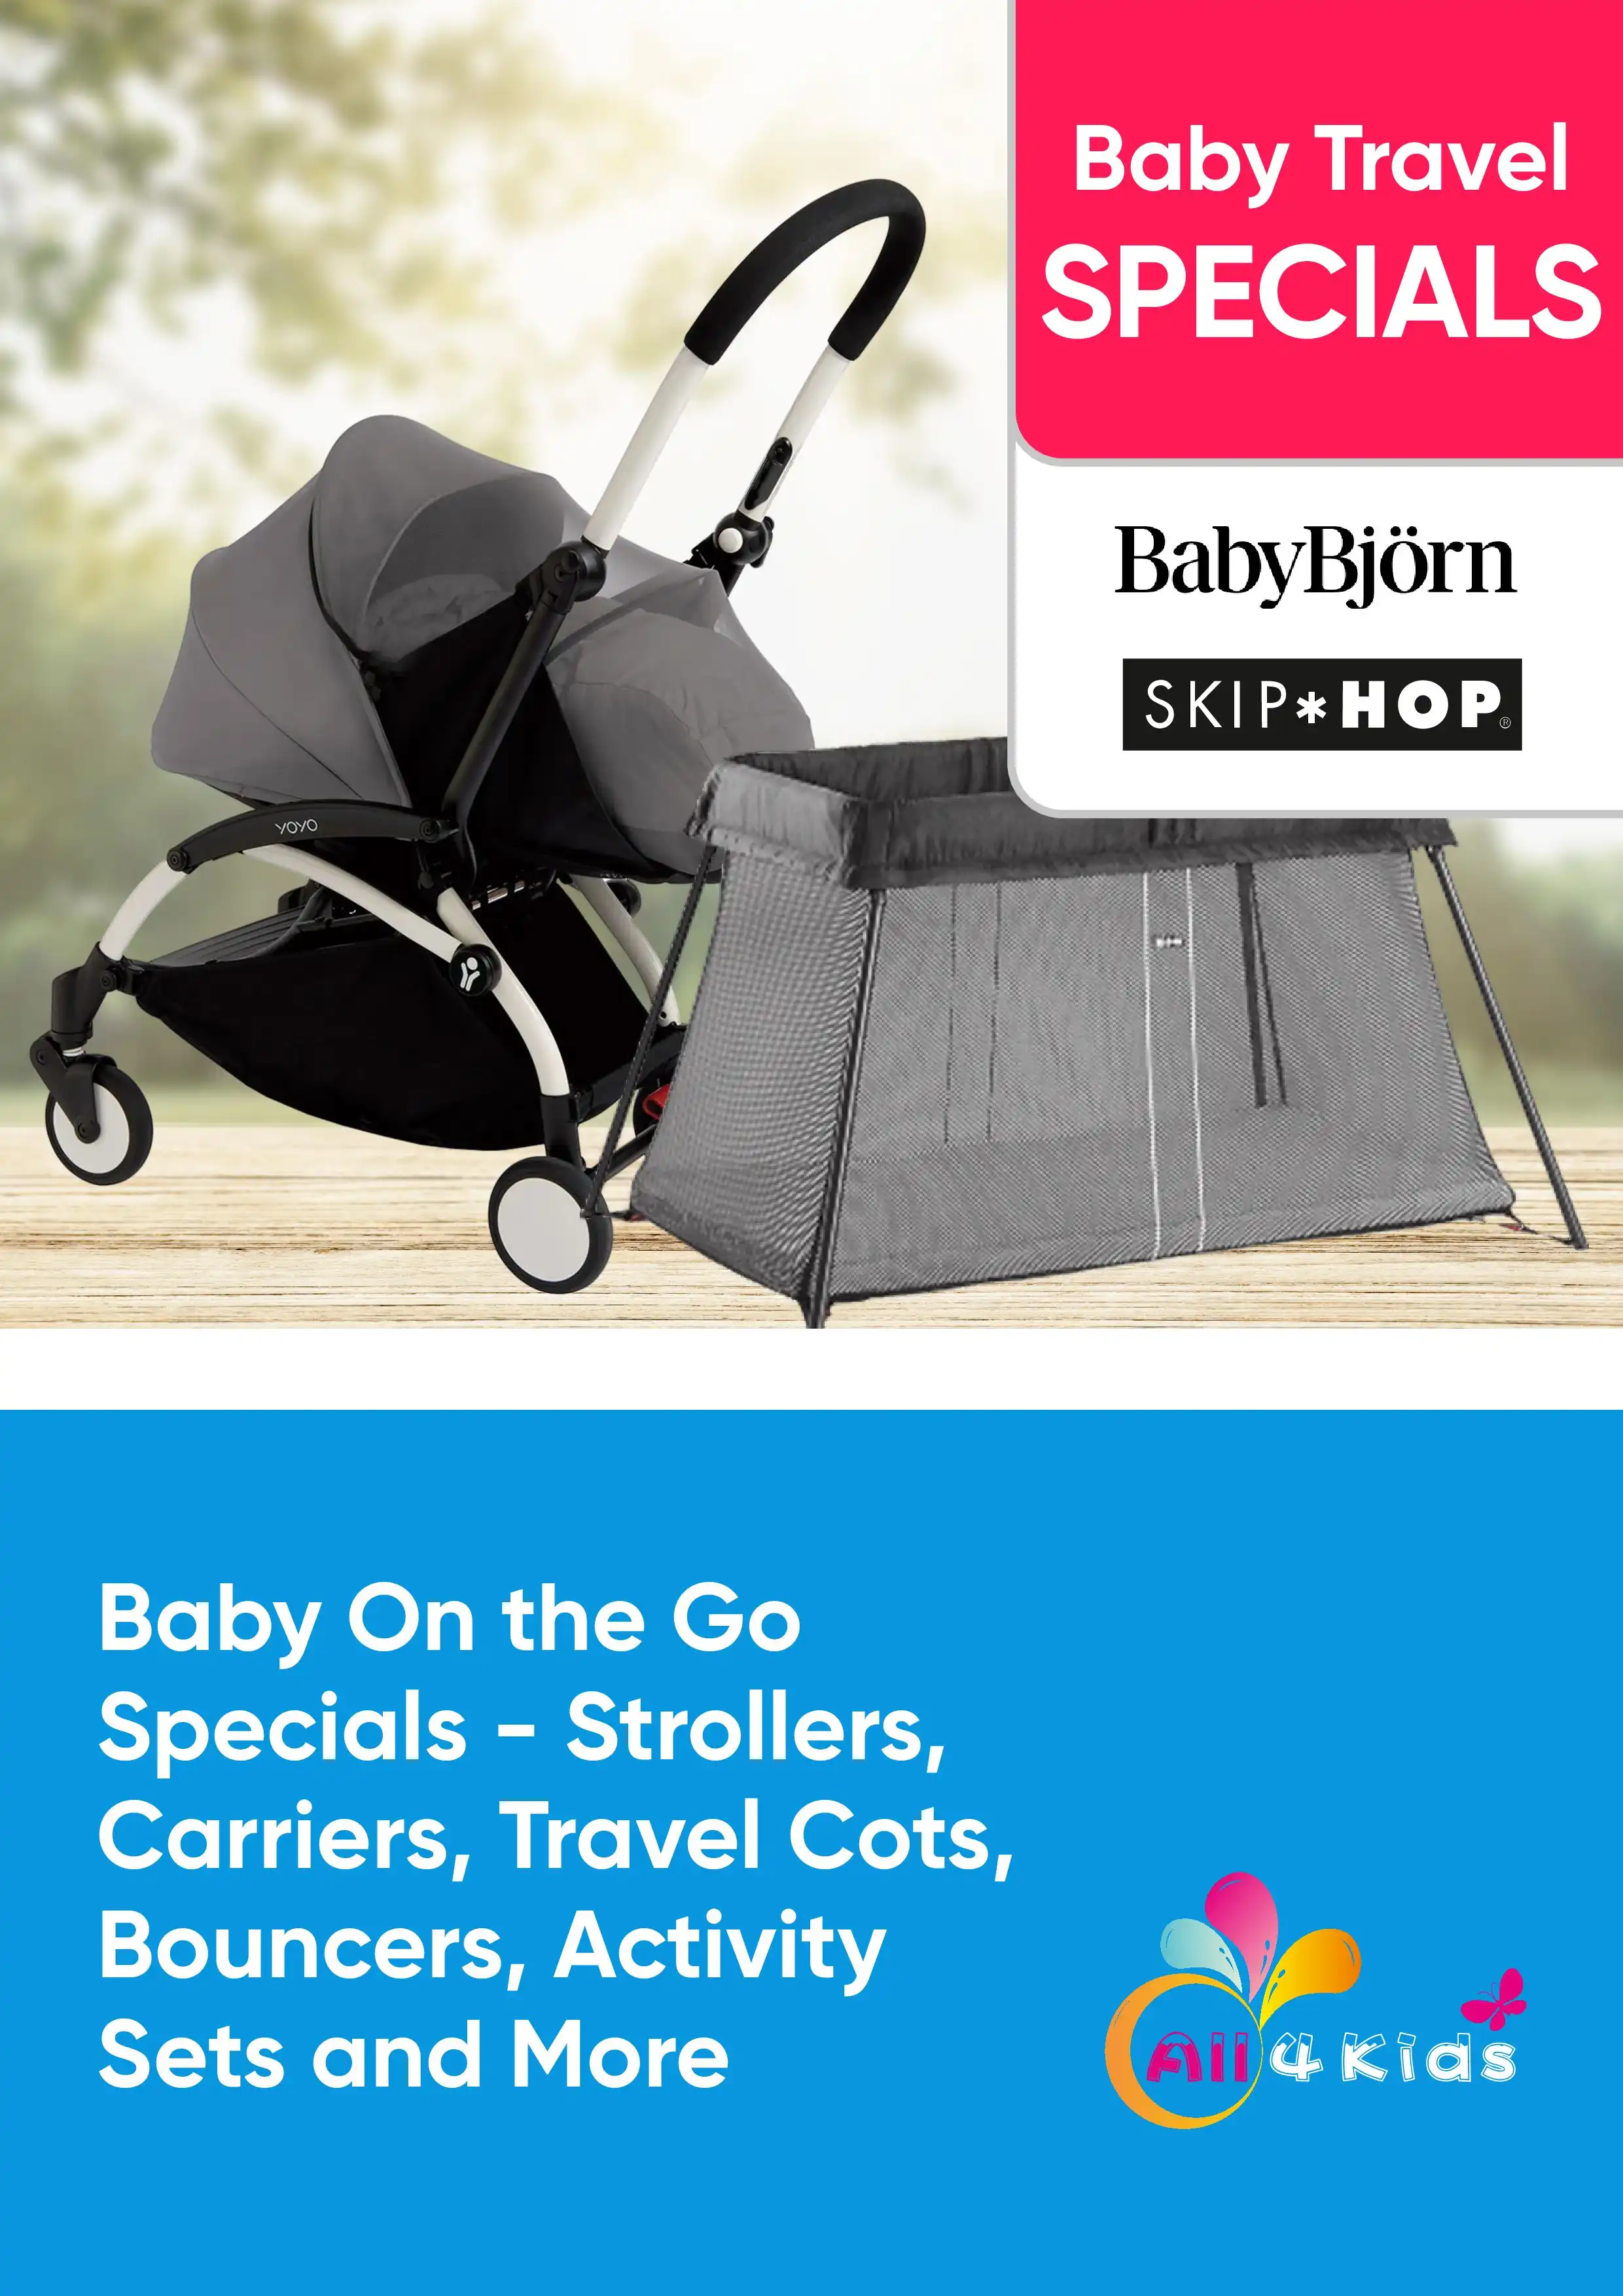 Baby On the Go Specials - Strollers, Carriers, Travel Cots, Bouncers, Activity Sets and More